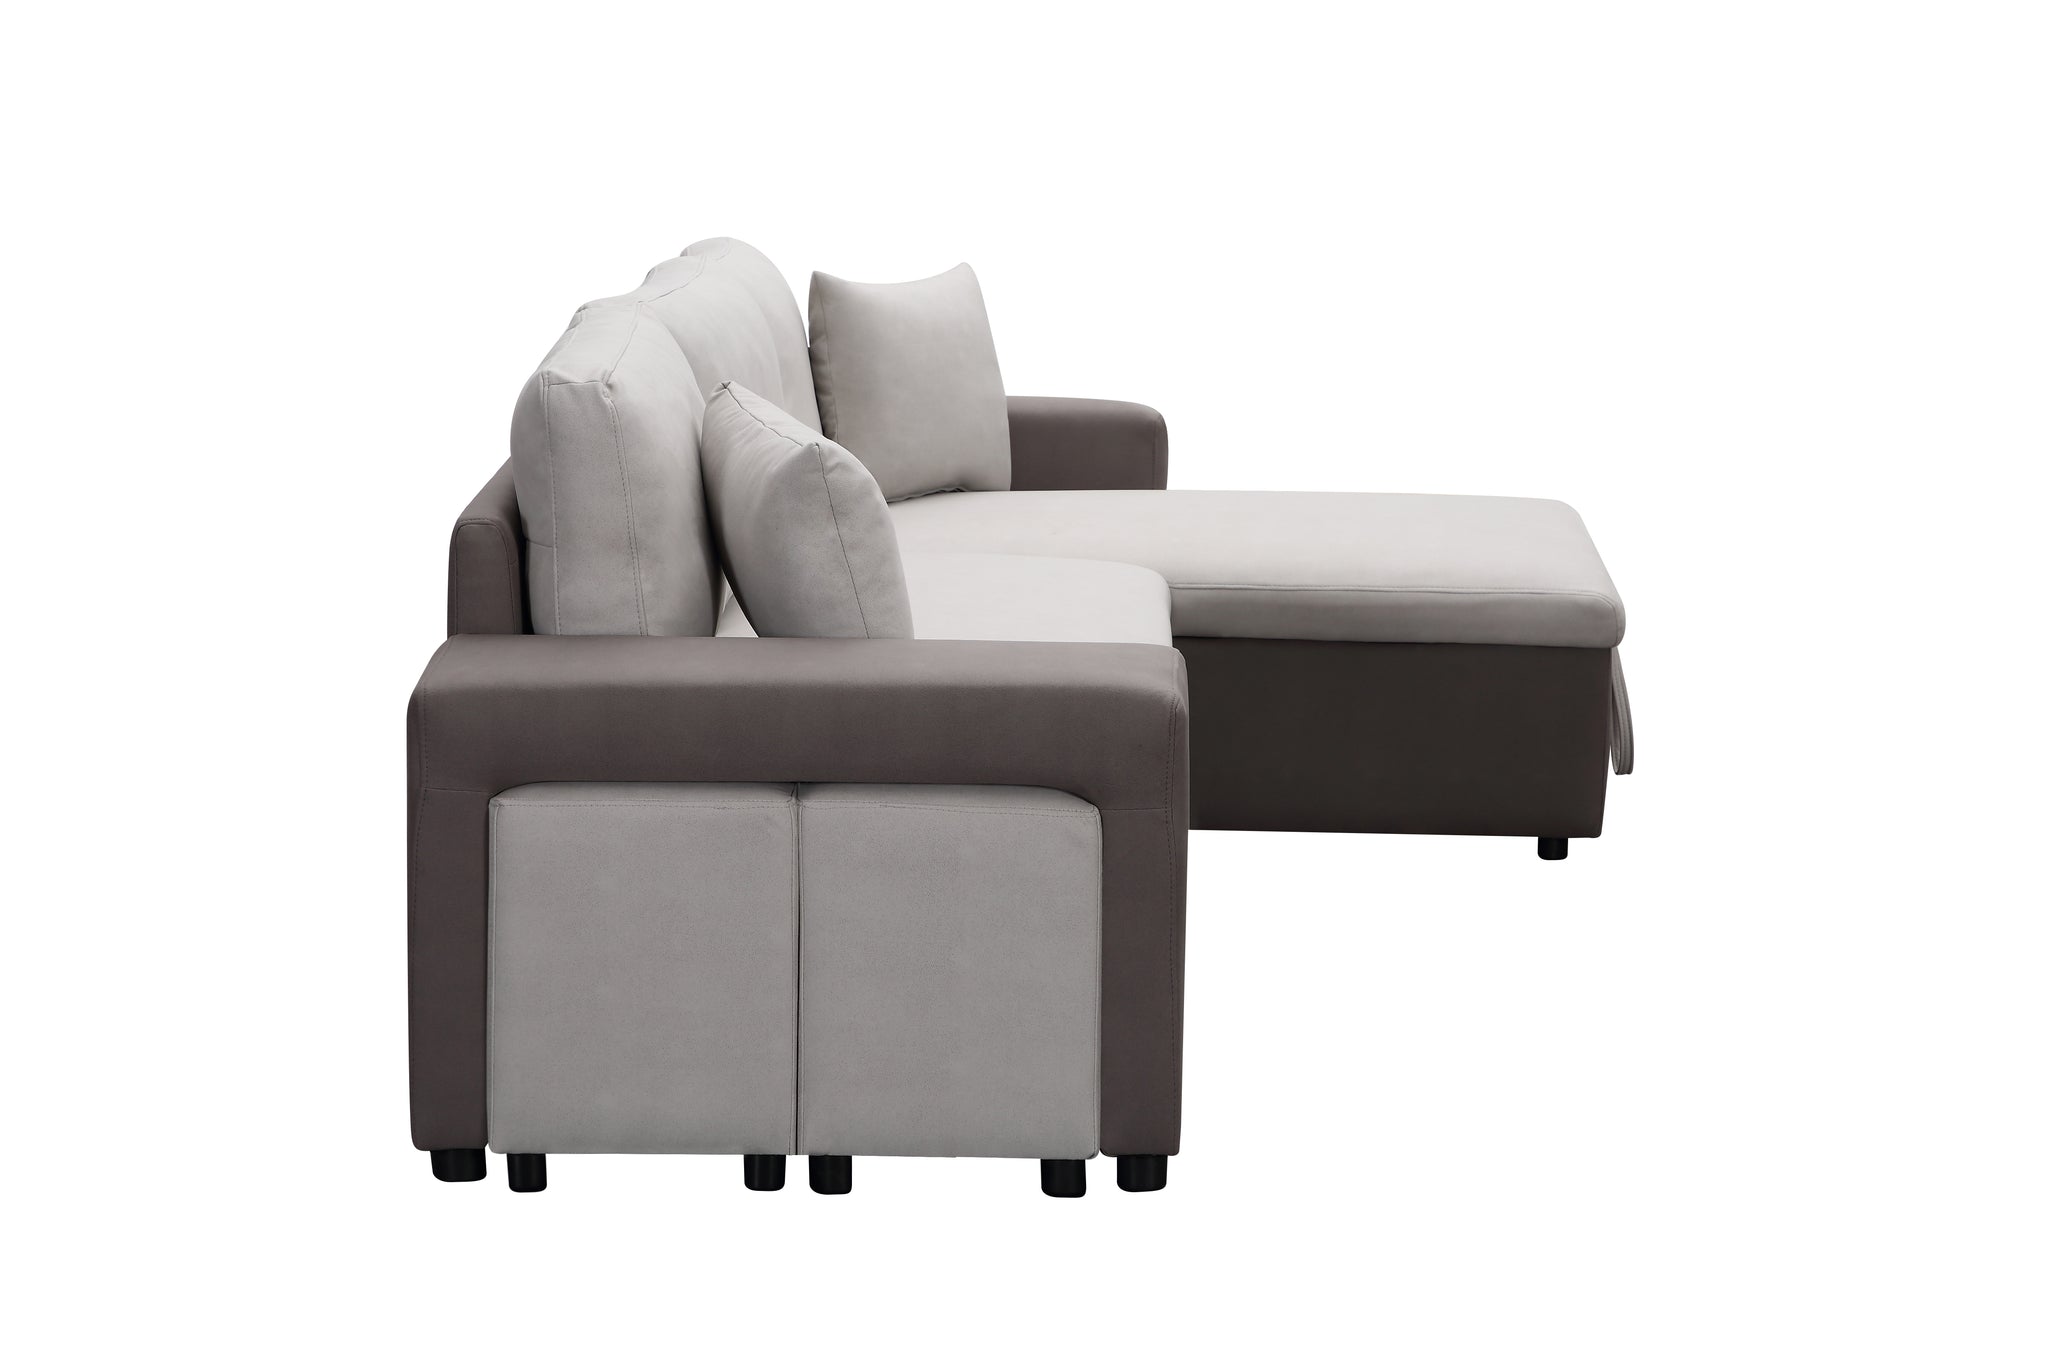 RaDEWAY 92.5"Reversible Sleeper with 2 Stools and Storage Leathaire